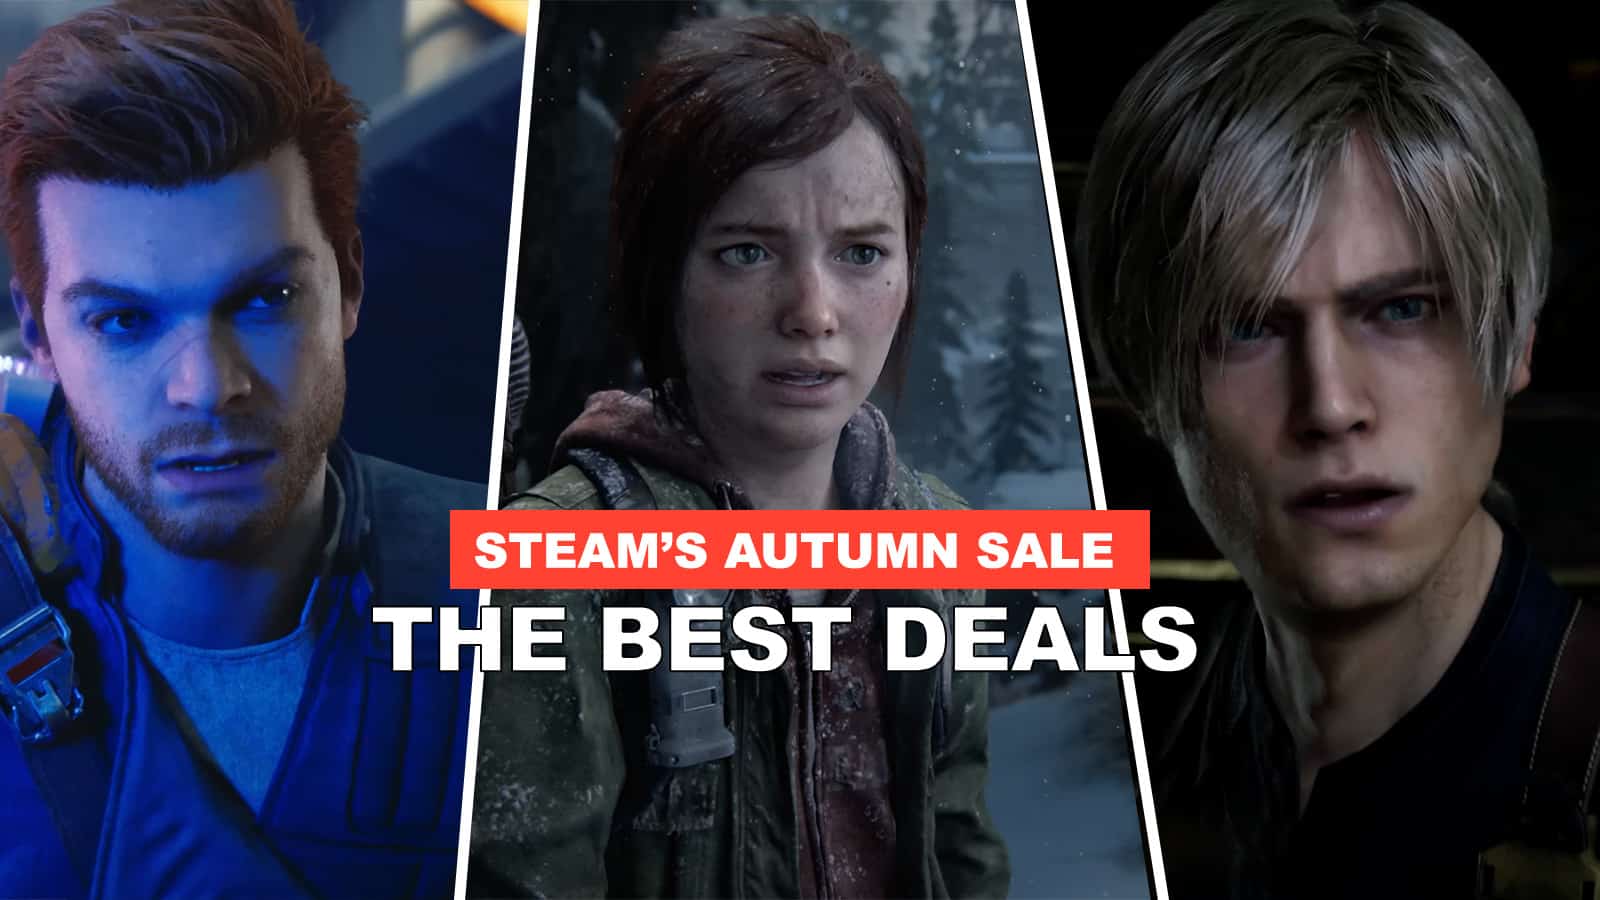 Here Are The Best Deals From Steam’s Autumn Sale